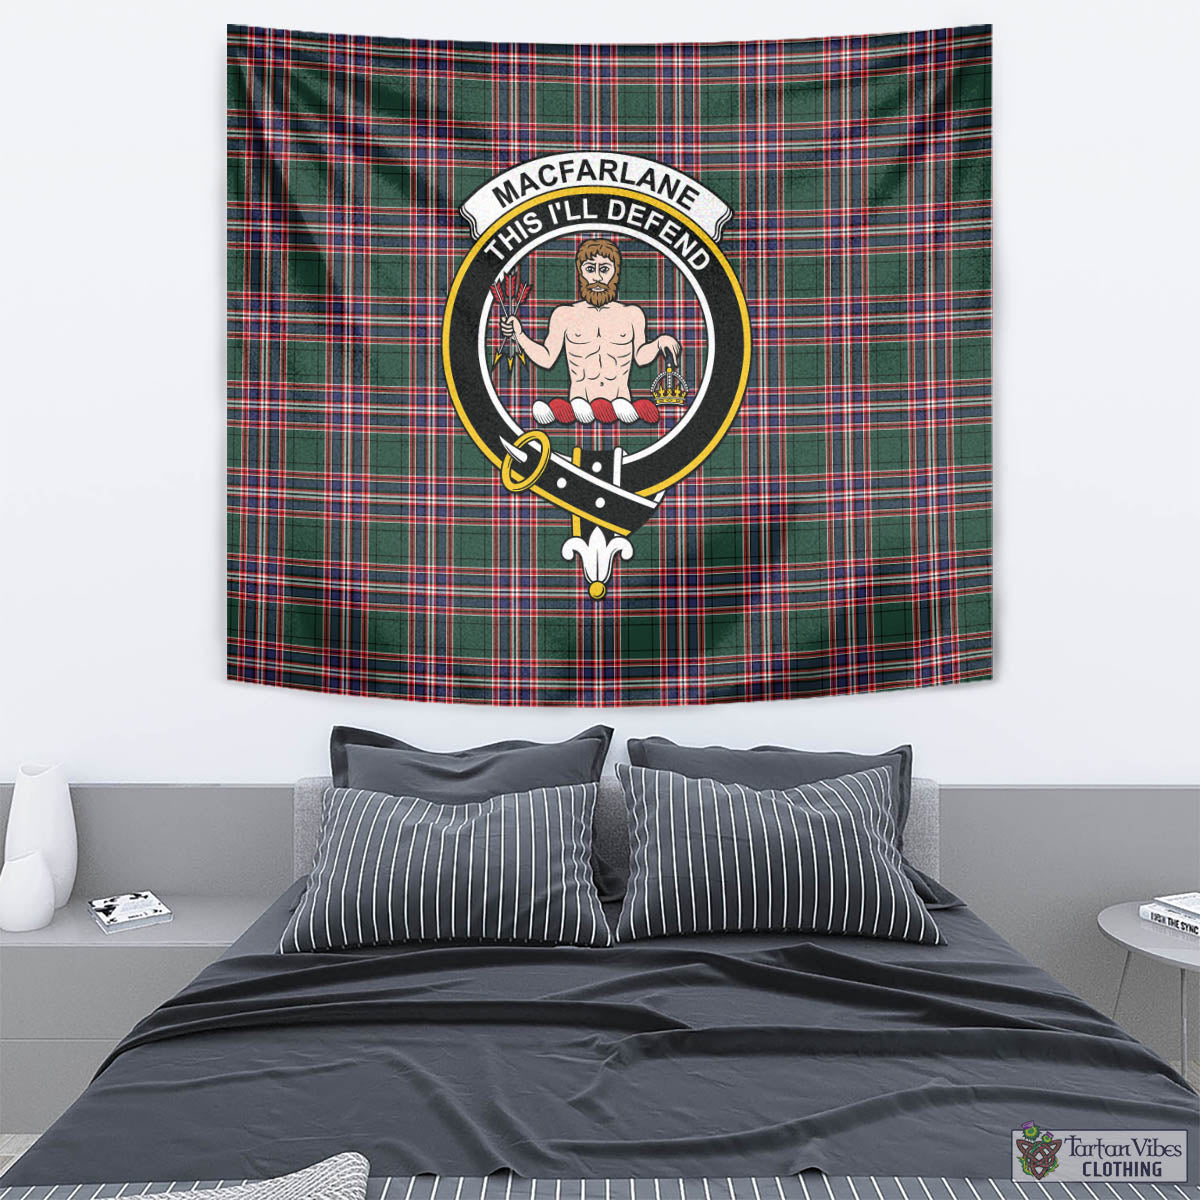 Tartan Vibes Clothing MacFarlane Hunting Modern Tartan Tapestry Wall Hanging and Home Decor for Room with Family Crest